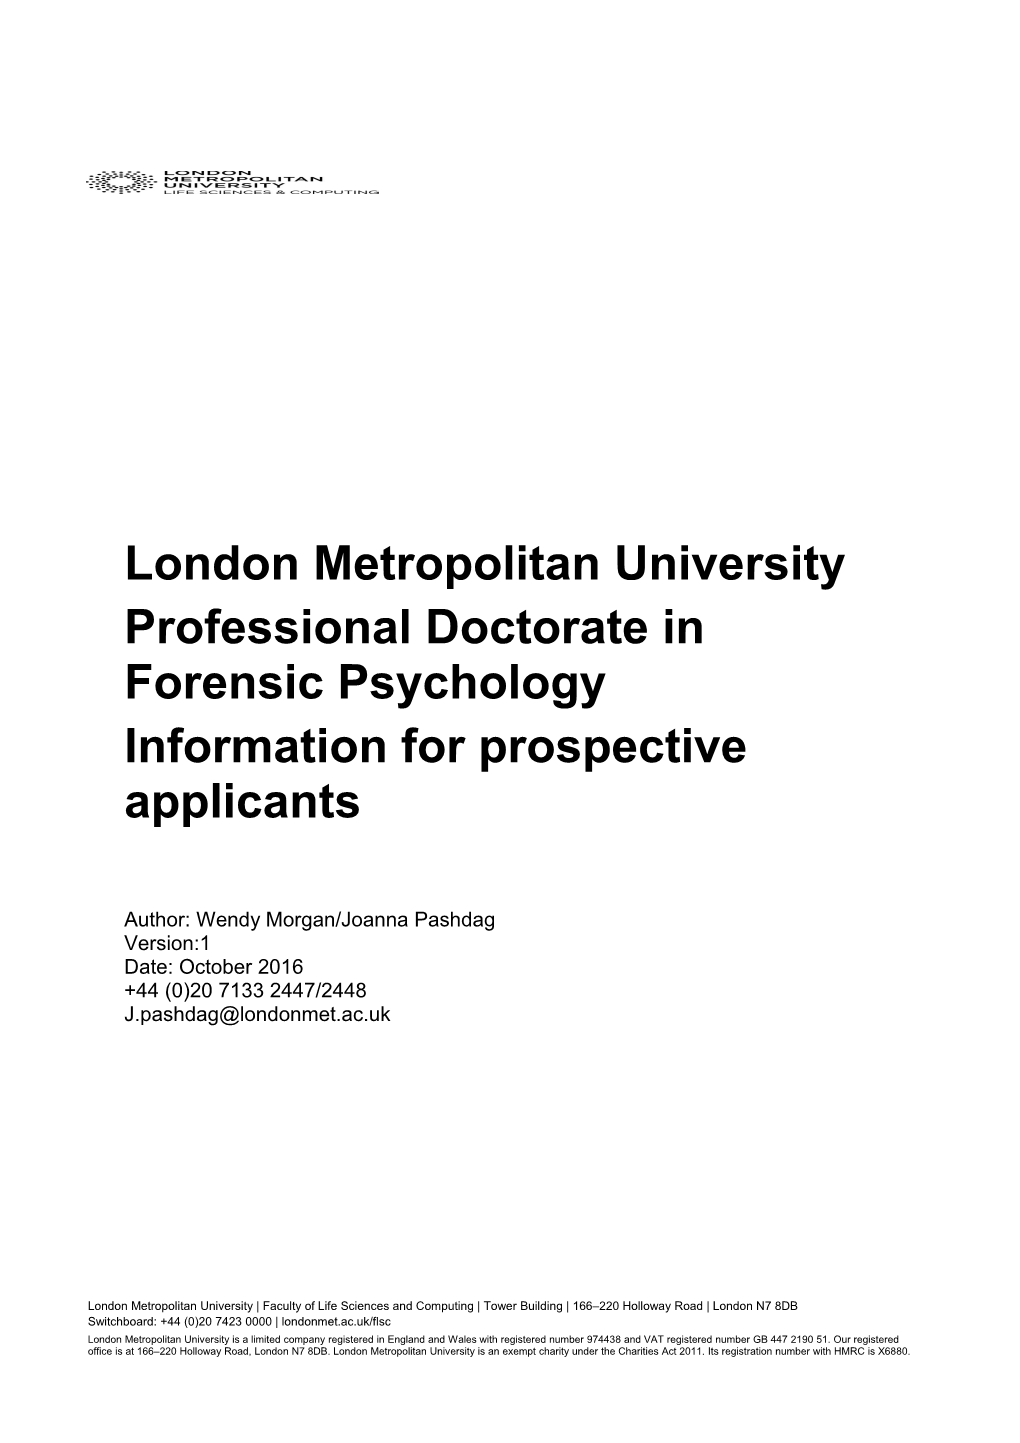 Professional Doctorate in Forensic Psychology